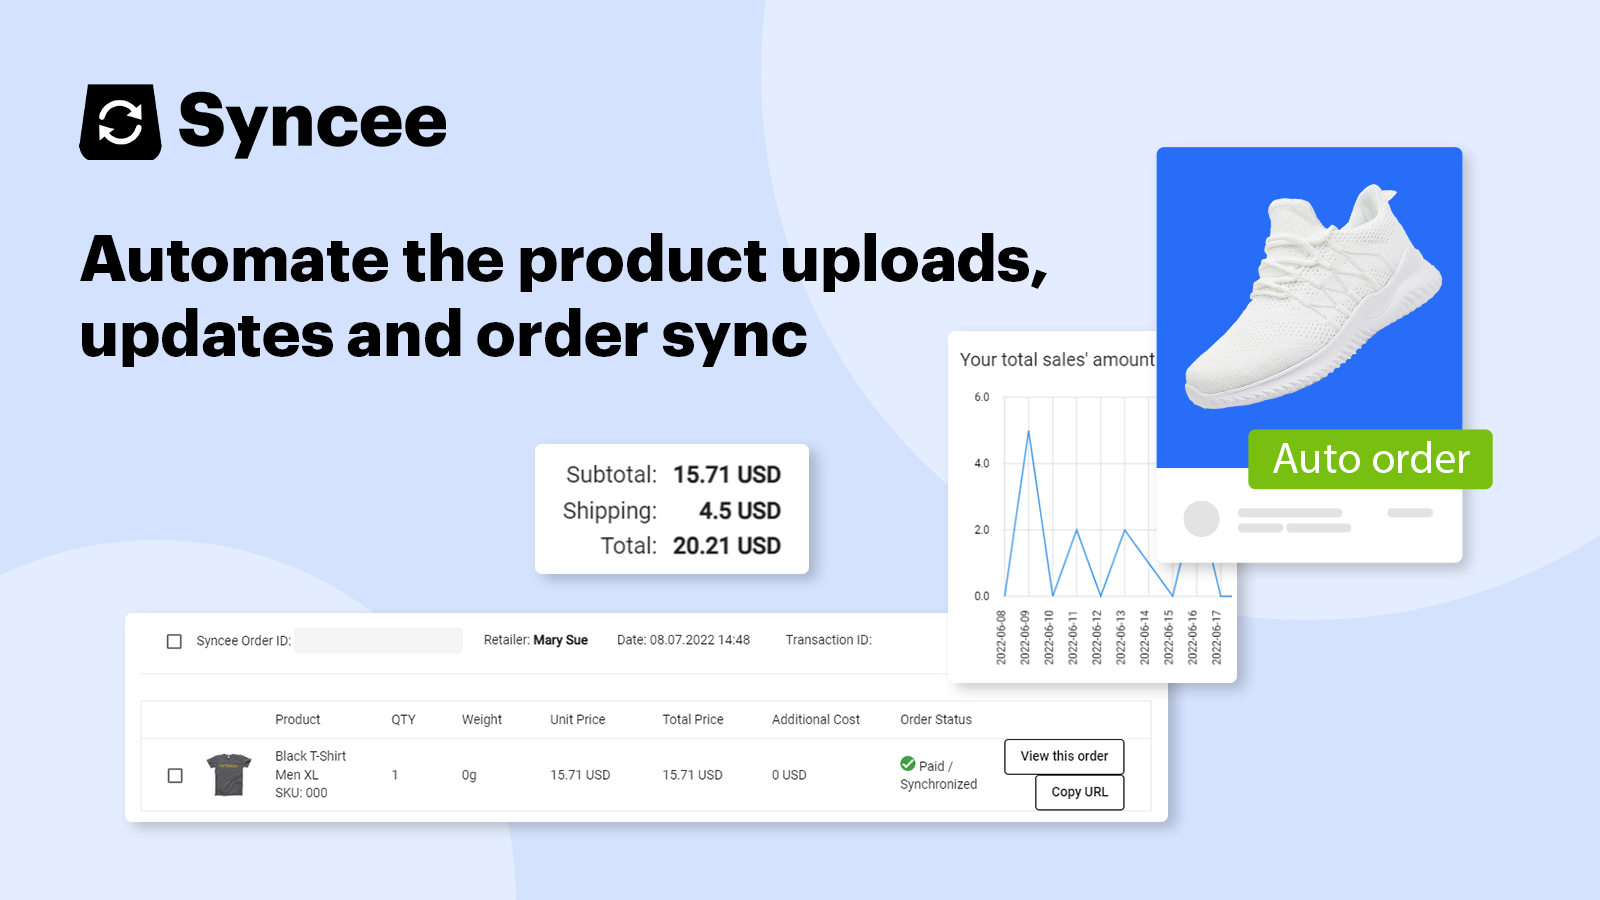 Automate the product updates and order sync